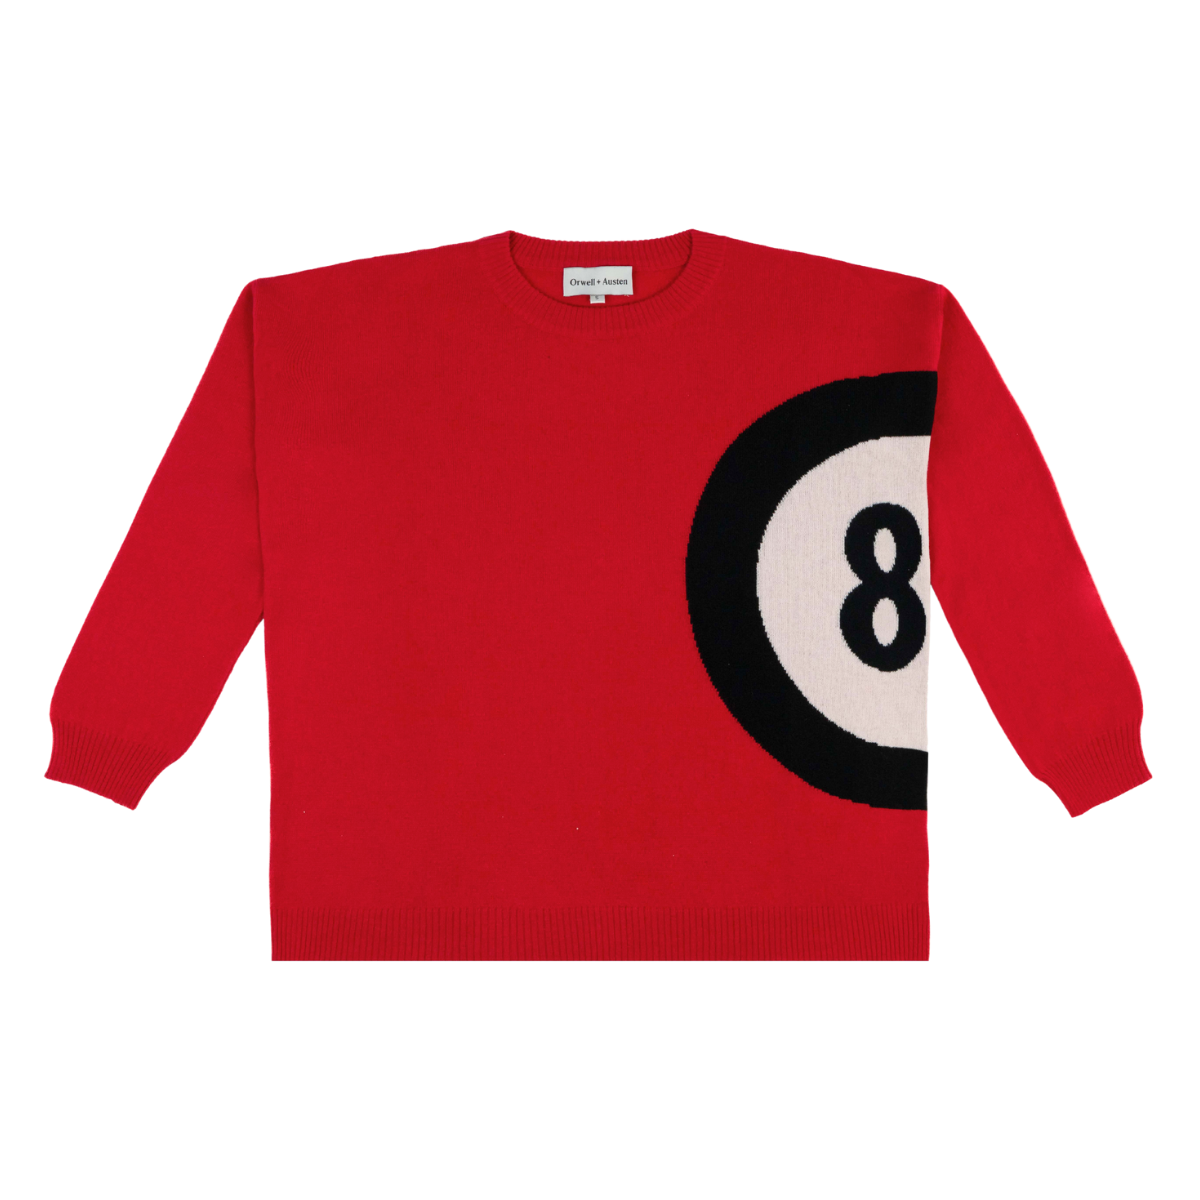 Lucky 8 Cashmere Blend Sweater